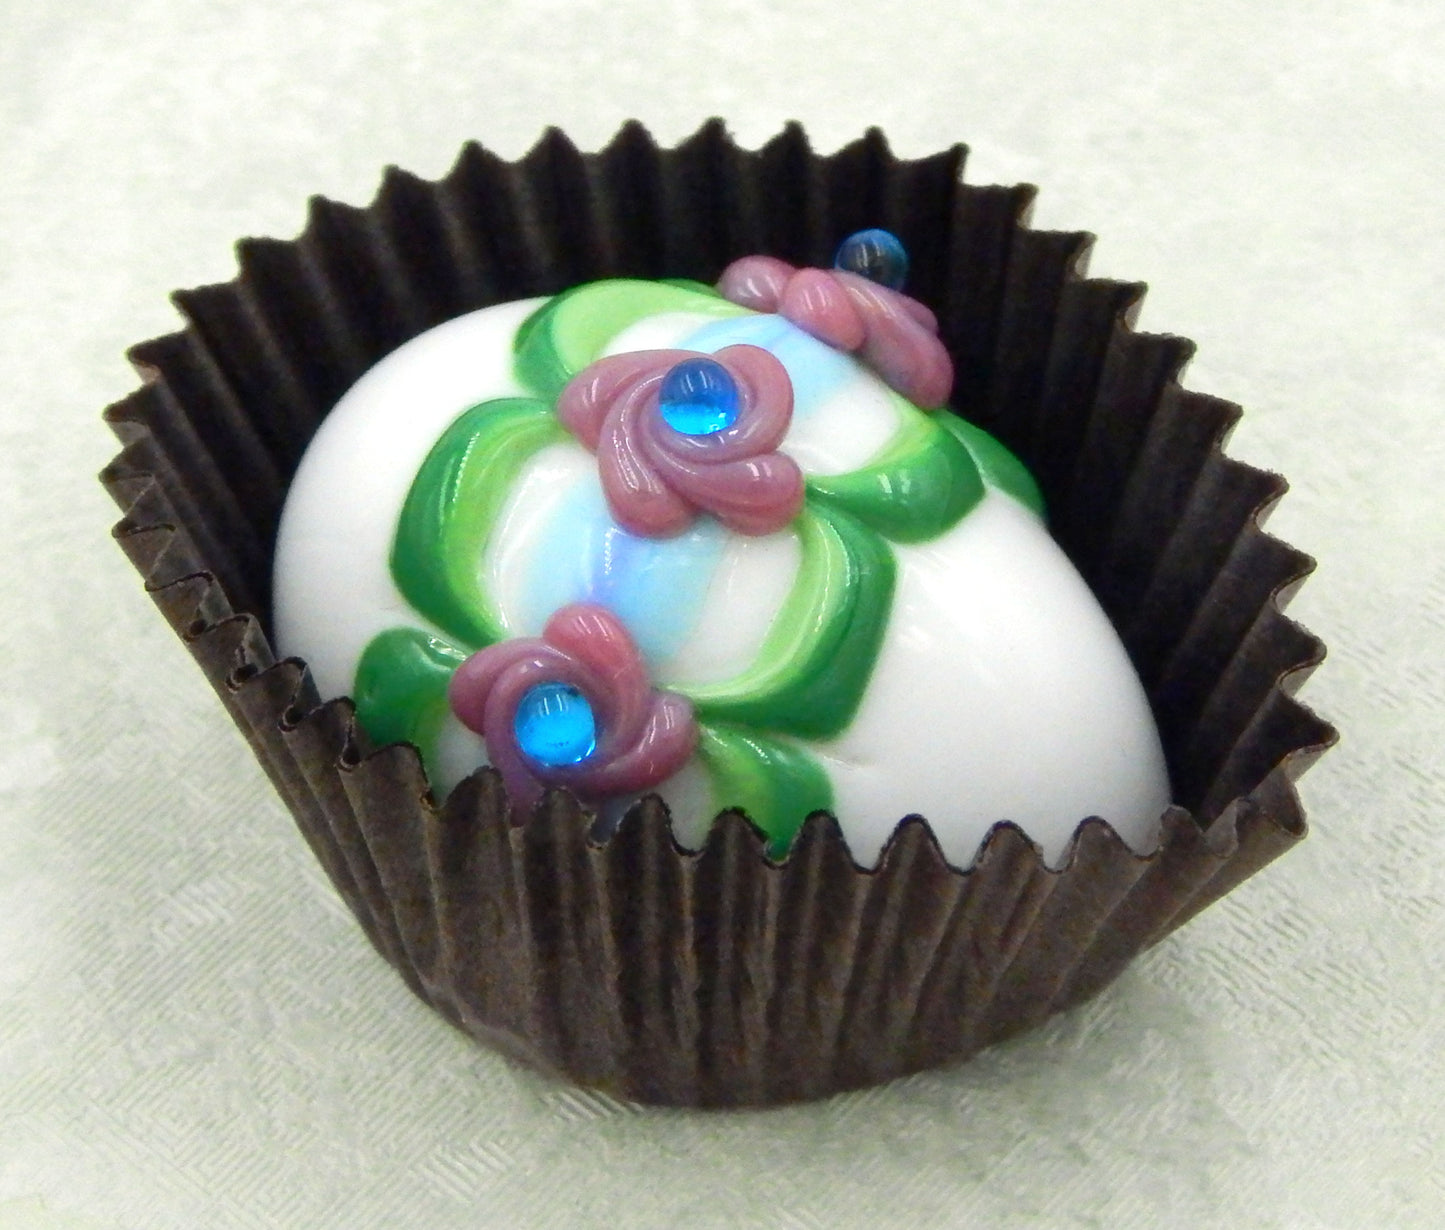 Chocolate Decorated Easter Egg with Flower Band (24-029+)